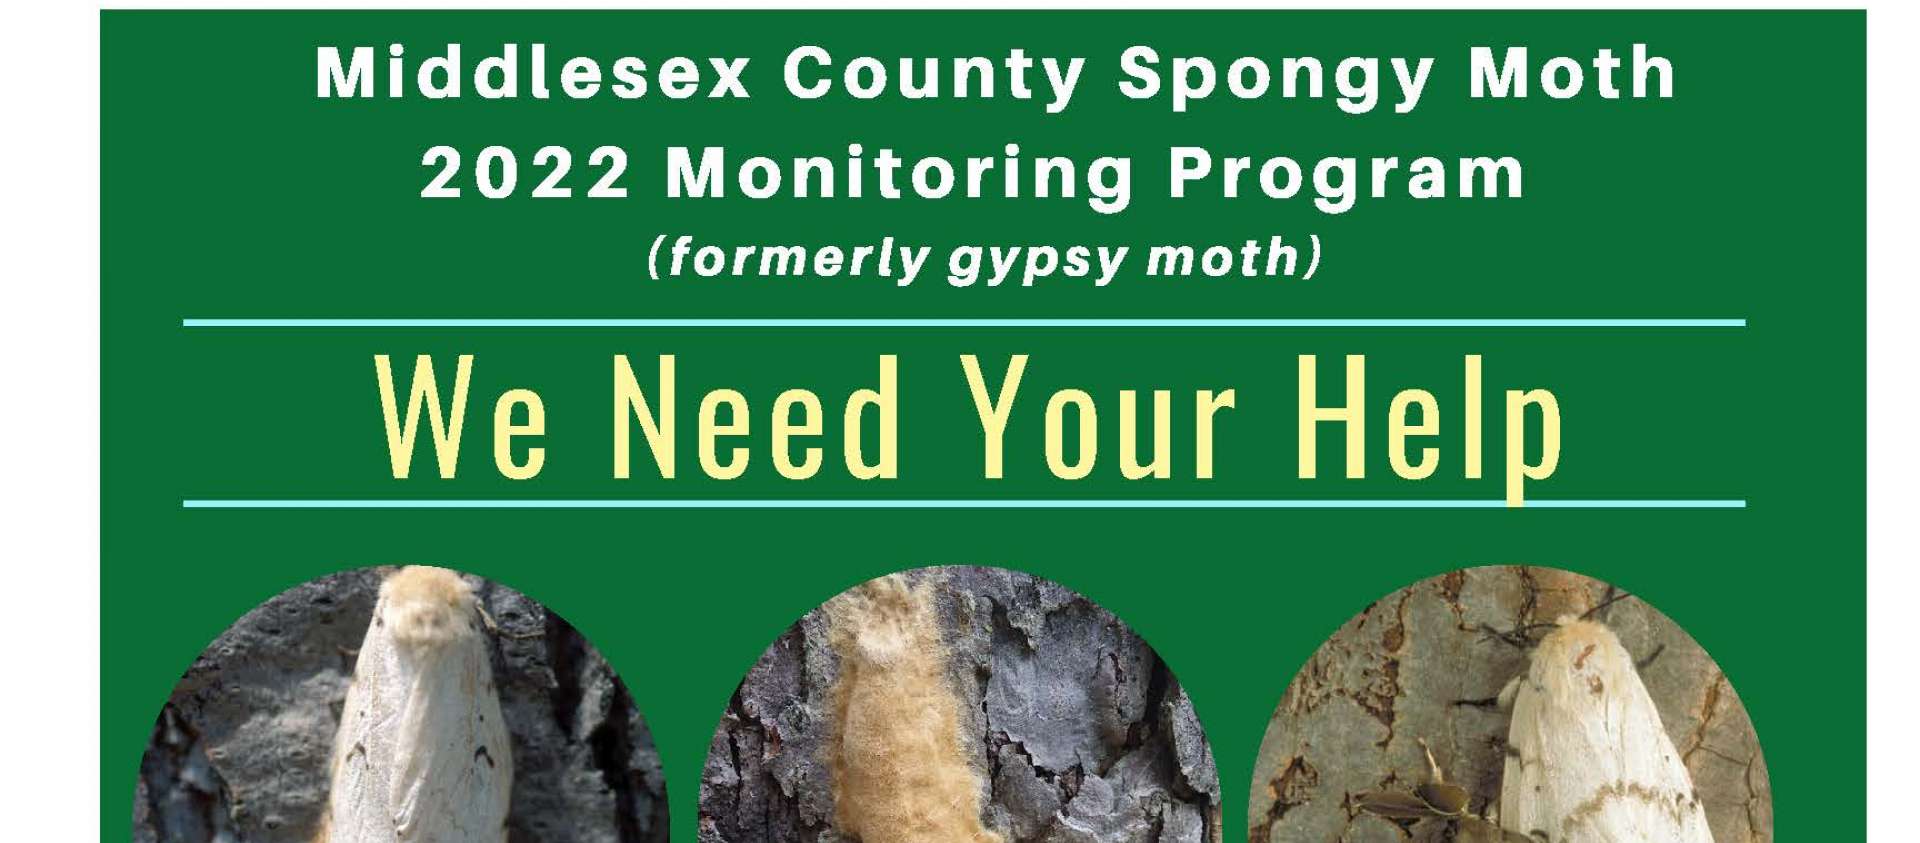 Poster with pictures of growth stages of Gypsy Moth